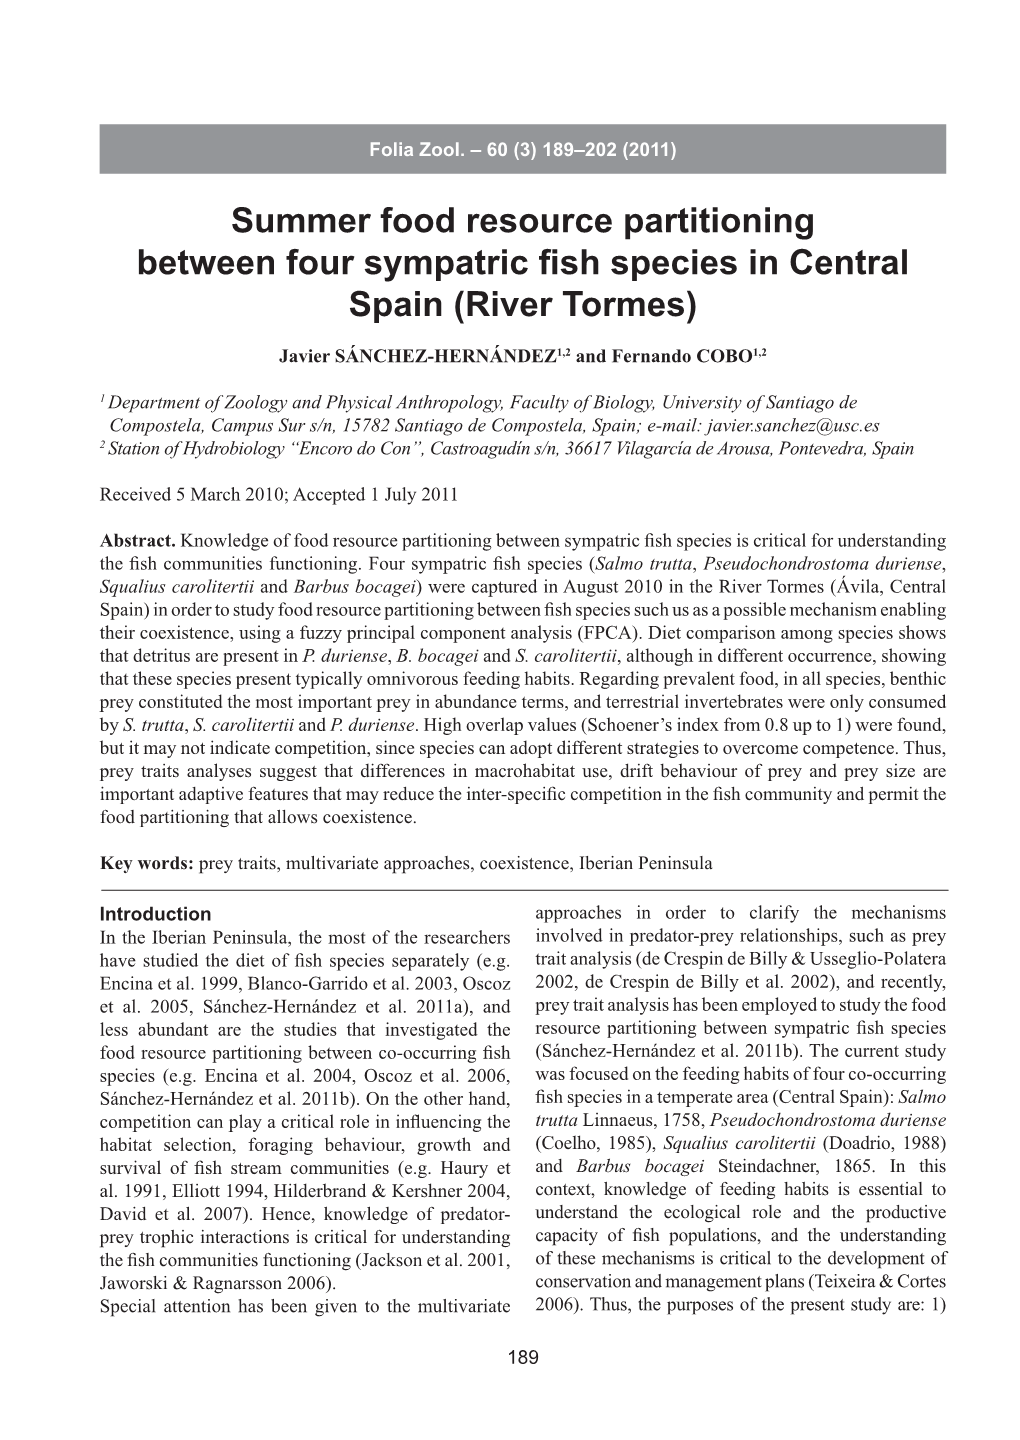 Summer Food Resource Partitioning Between Four Sympatric Fish Species in Central Spain (River Tormes)